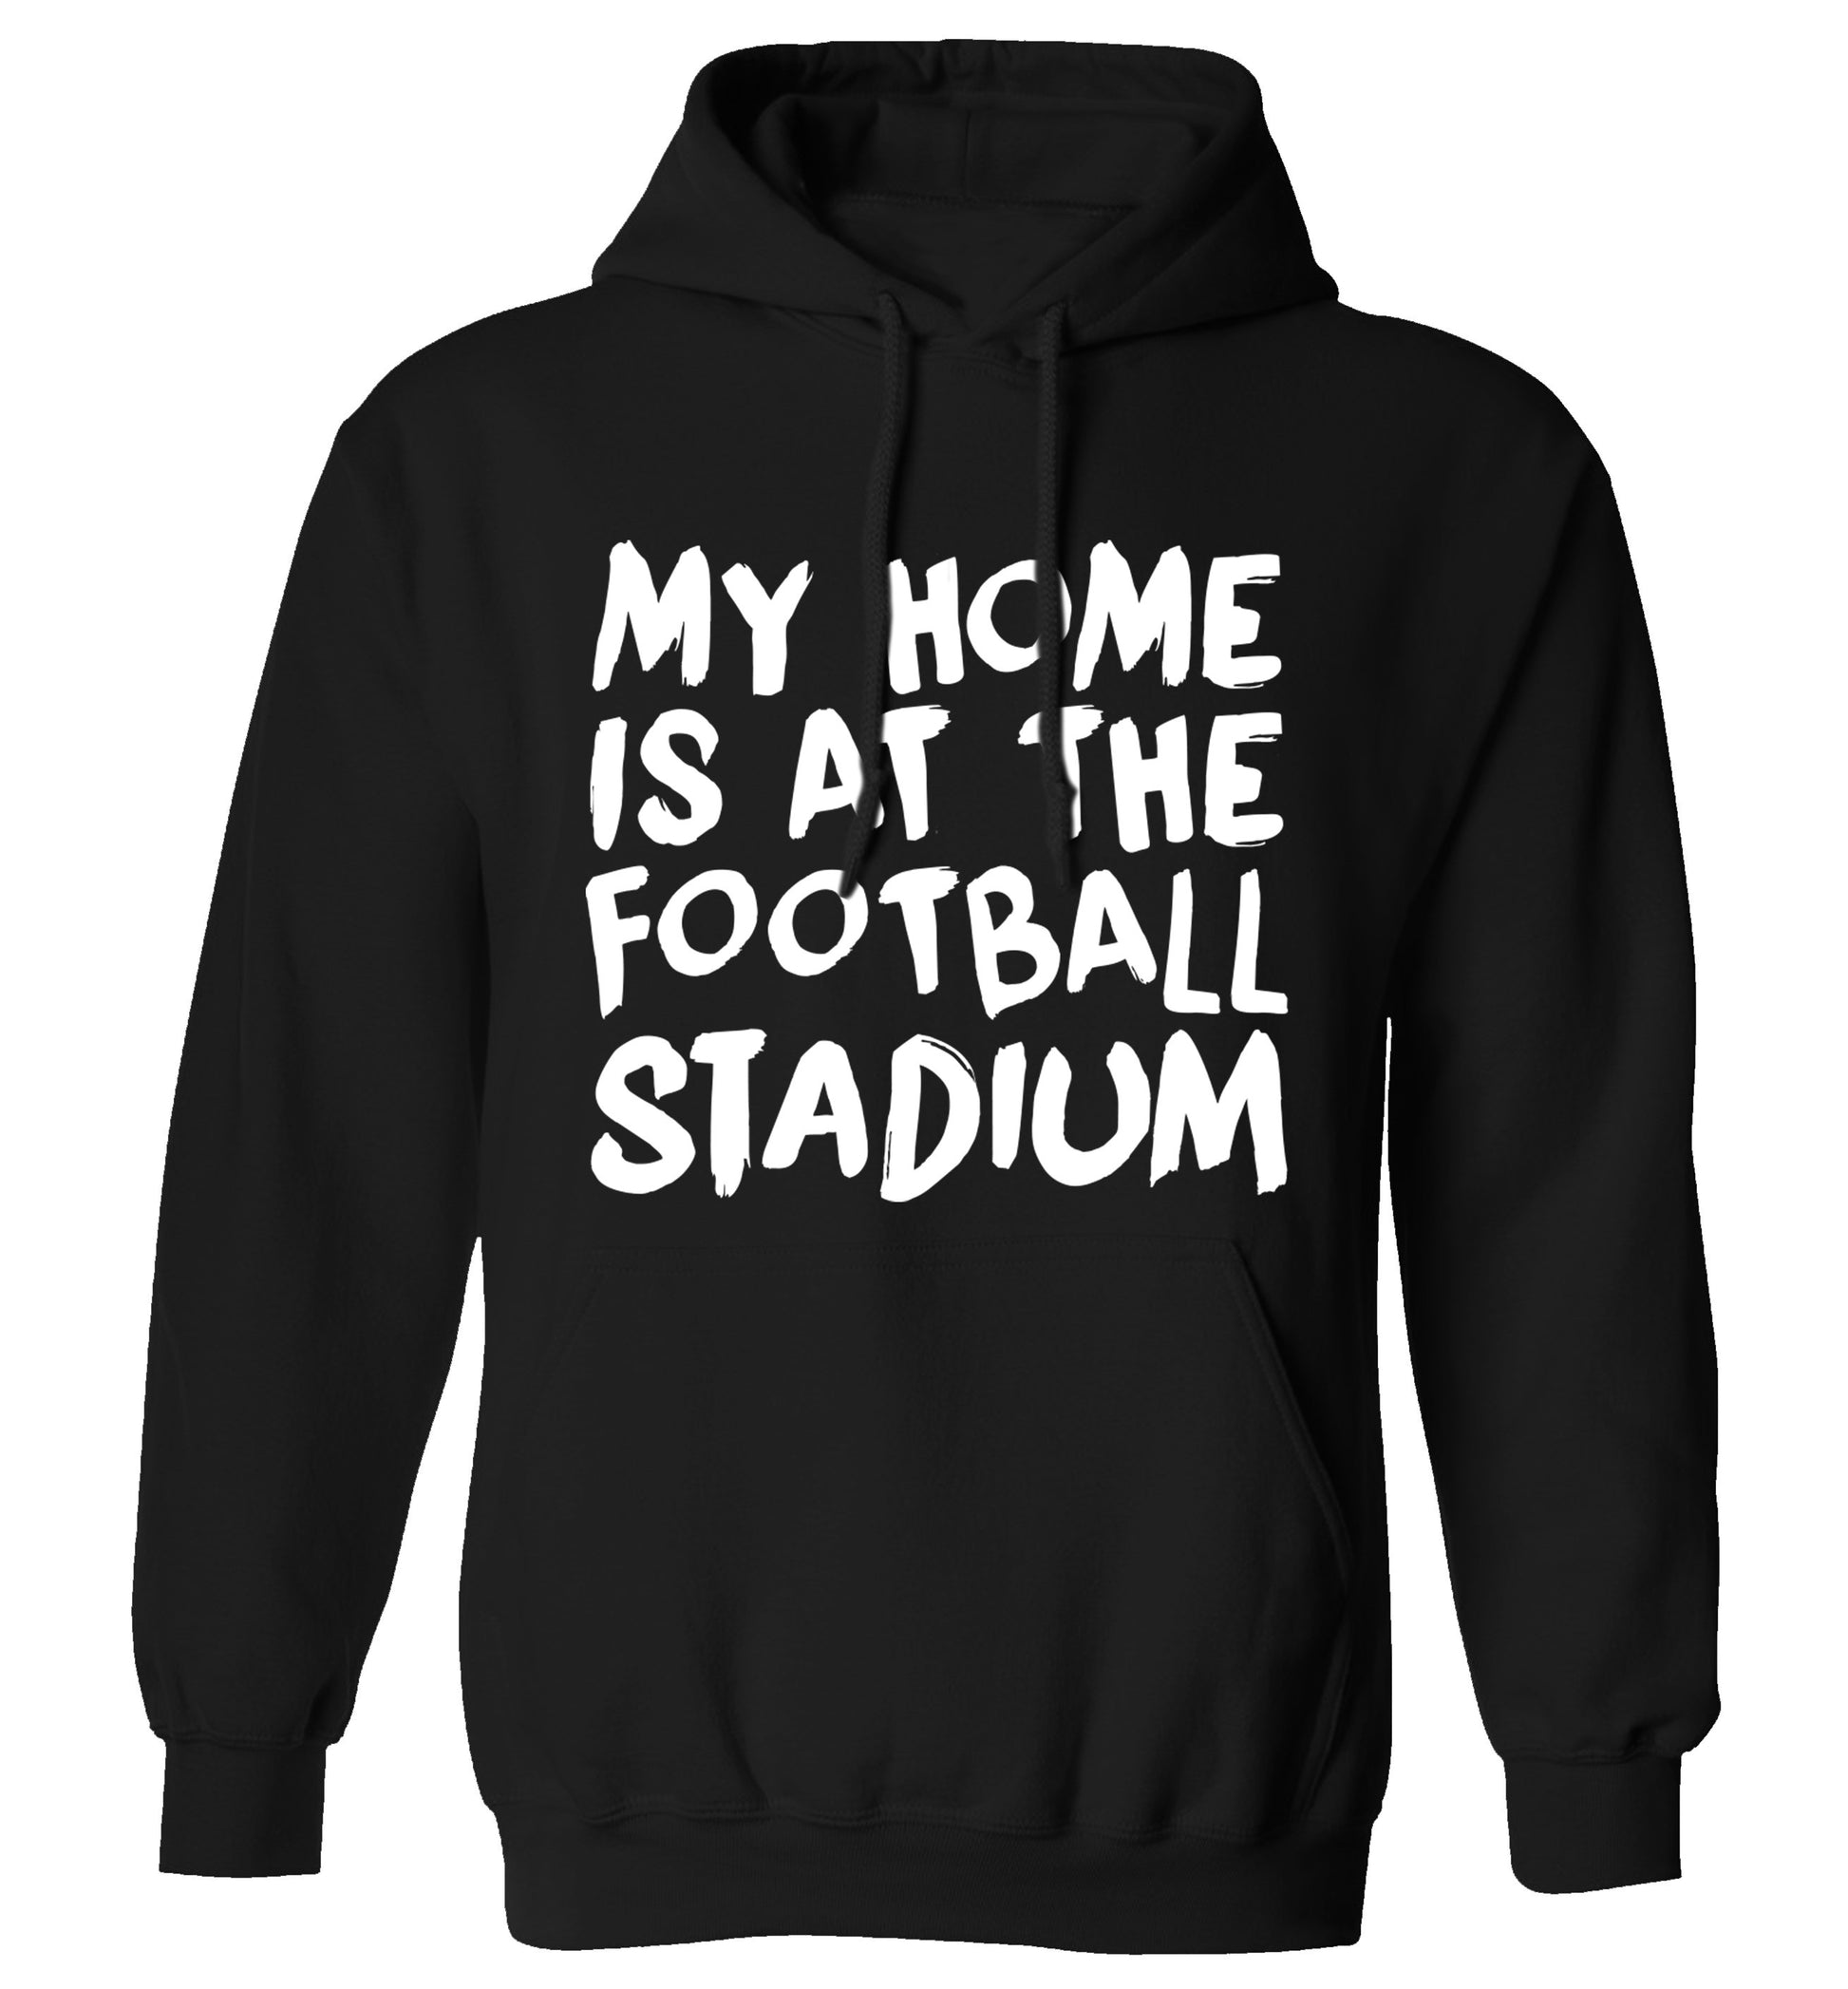 My home is at the football stadium adults unisex black hoodie 2XL